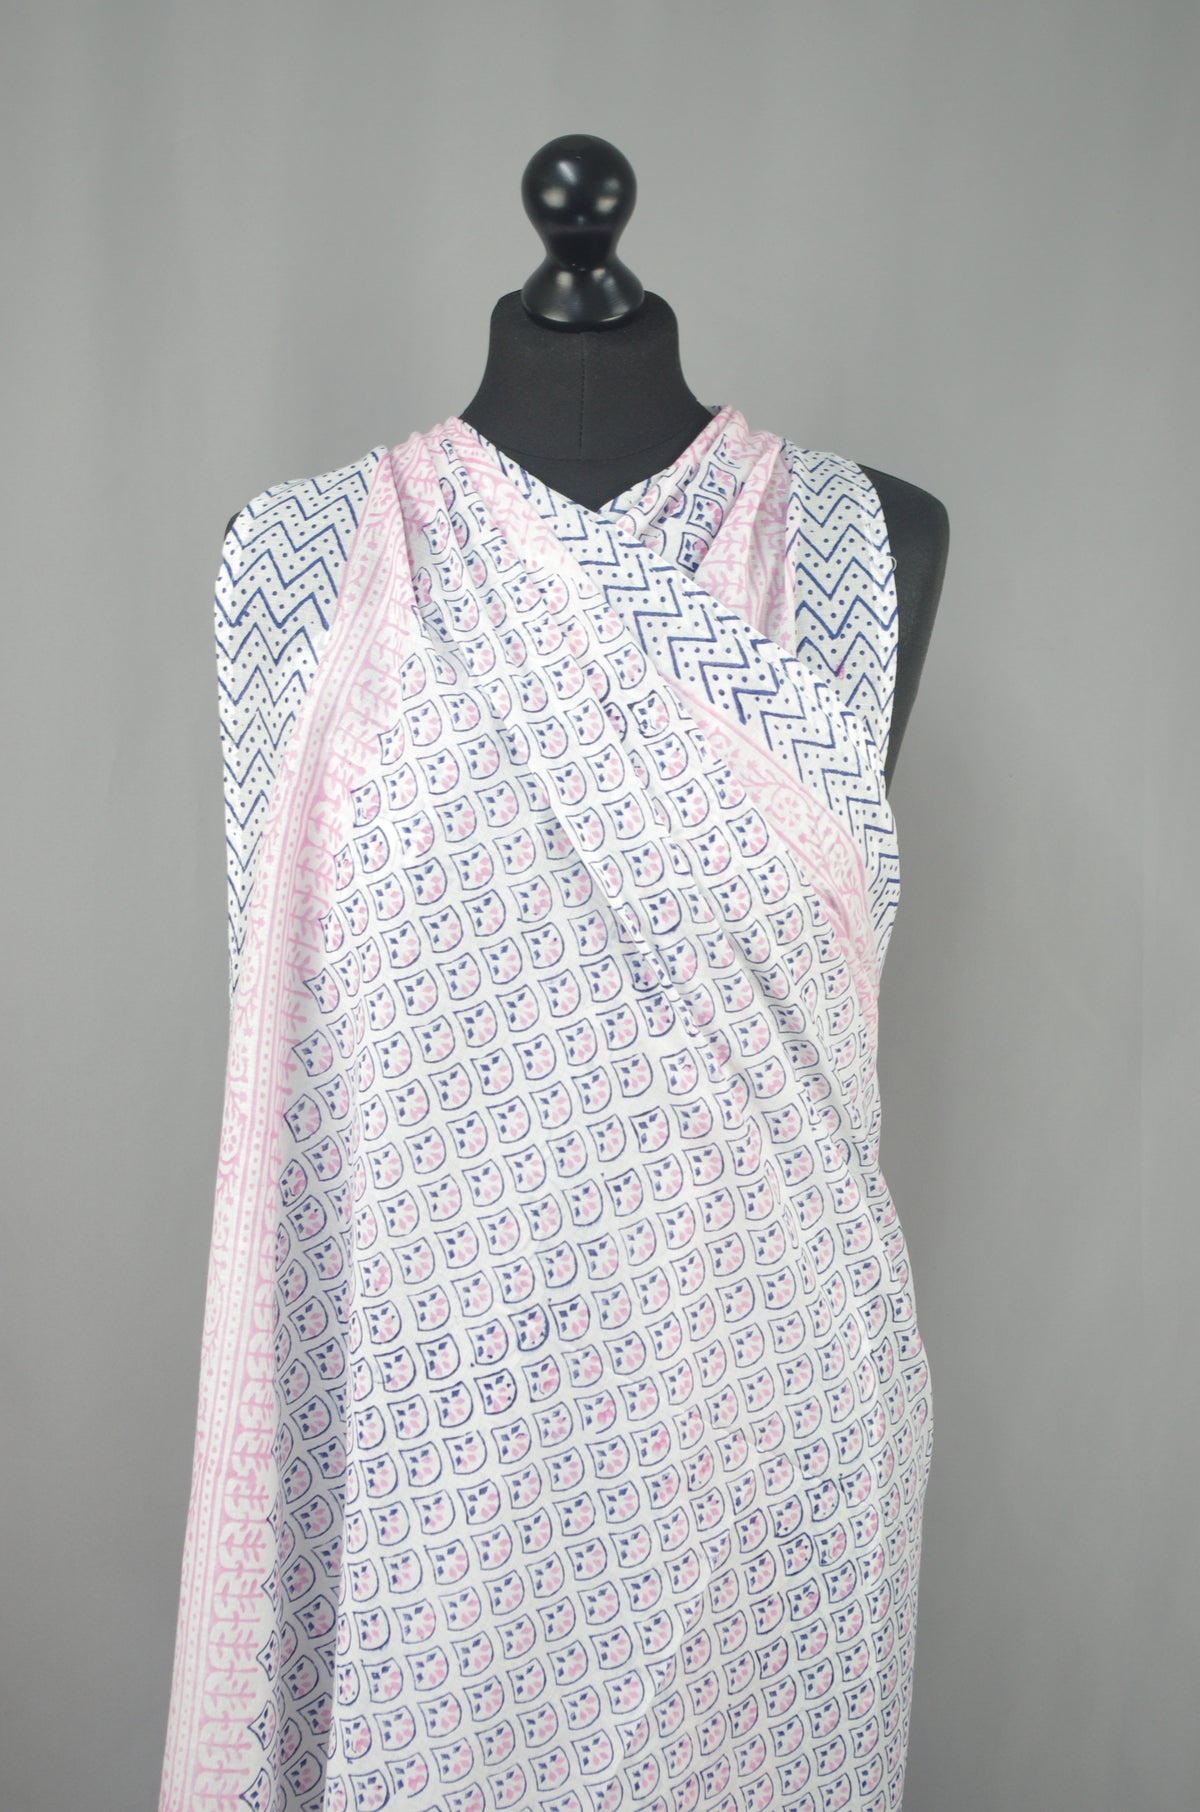 Beach Coverup Sarong Pareo - Fish scale